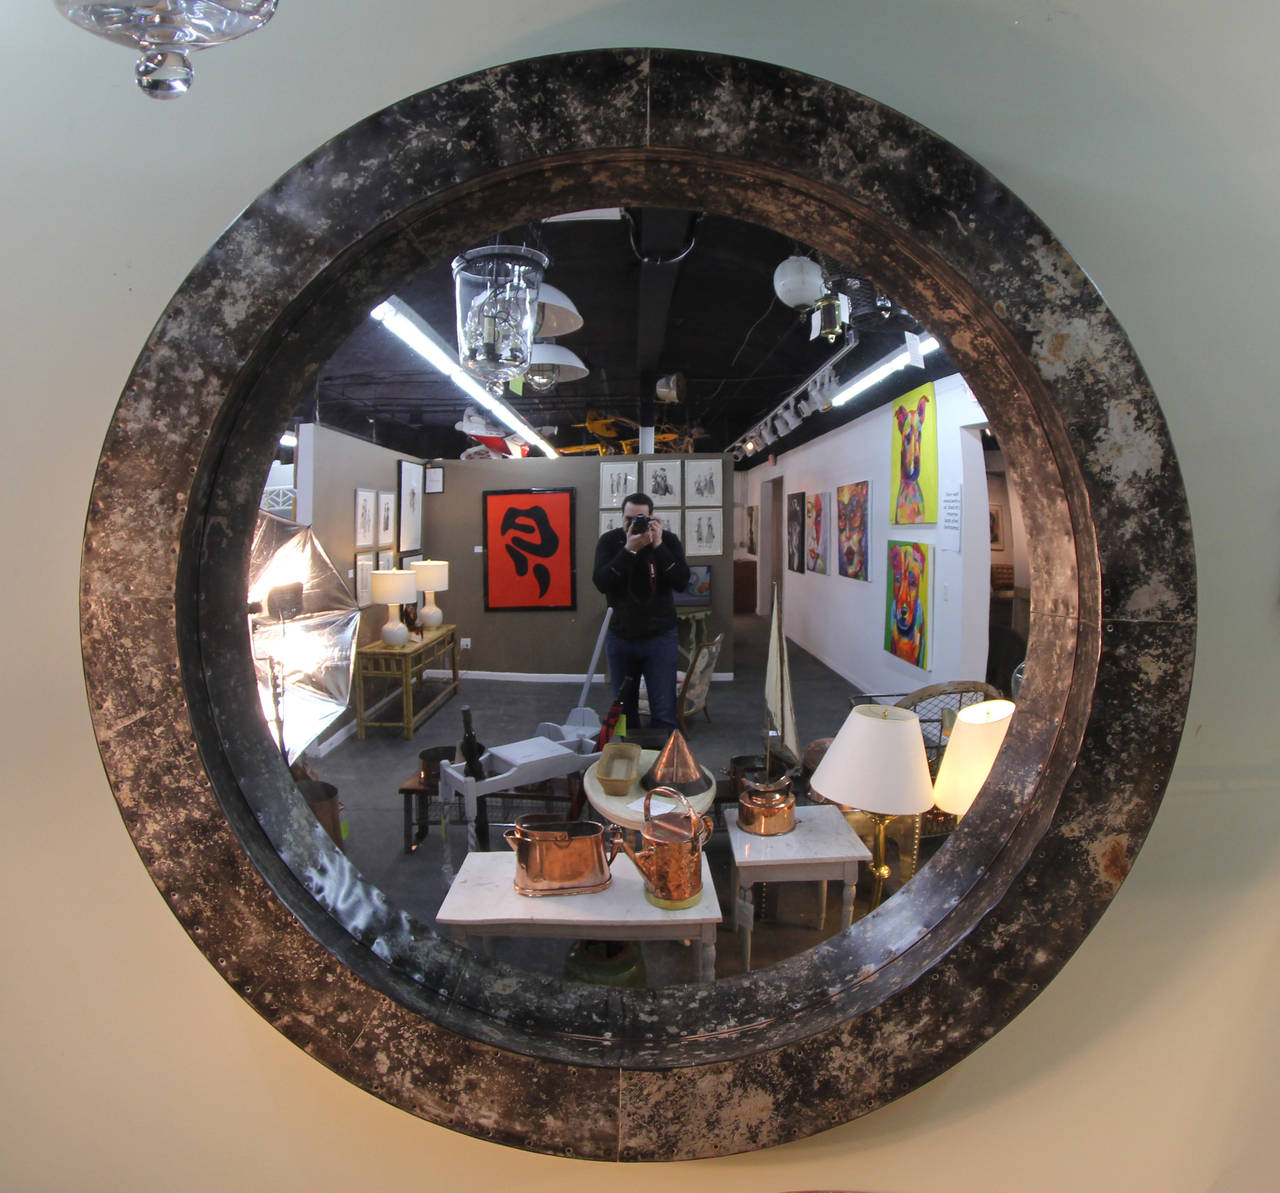 56 inch zinc frame with convex mirror. Nice patina, created by English artist.